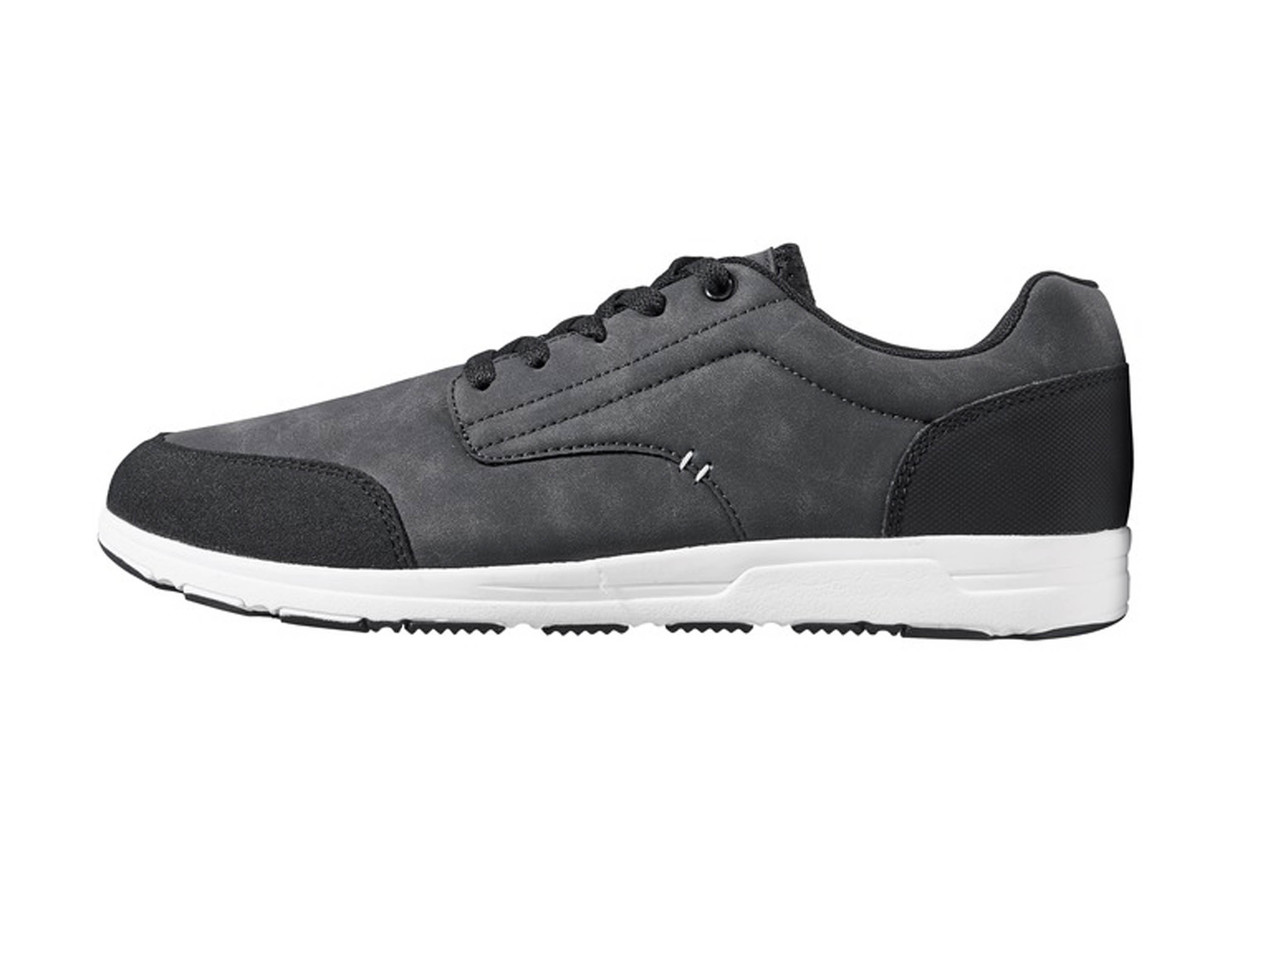 LIVERGY Men's Casual Trainers